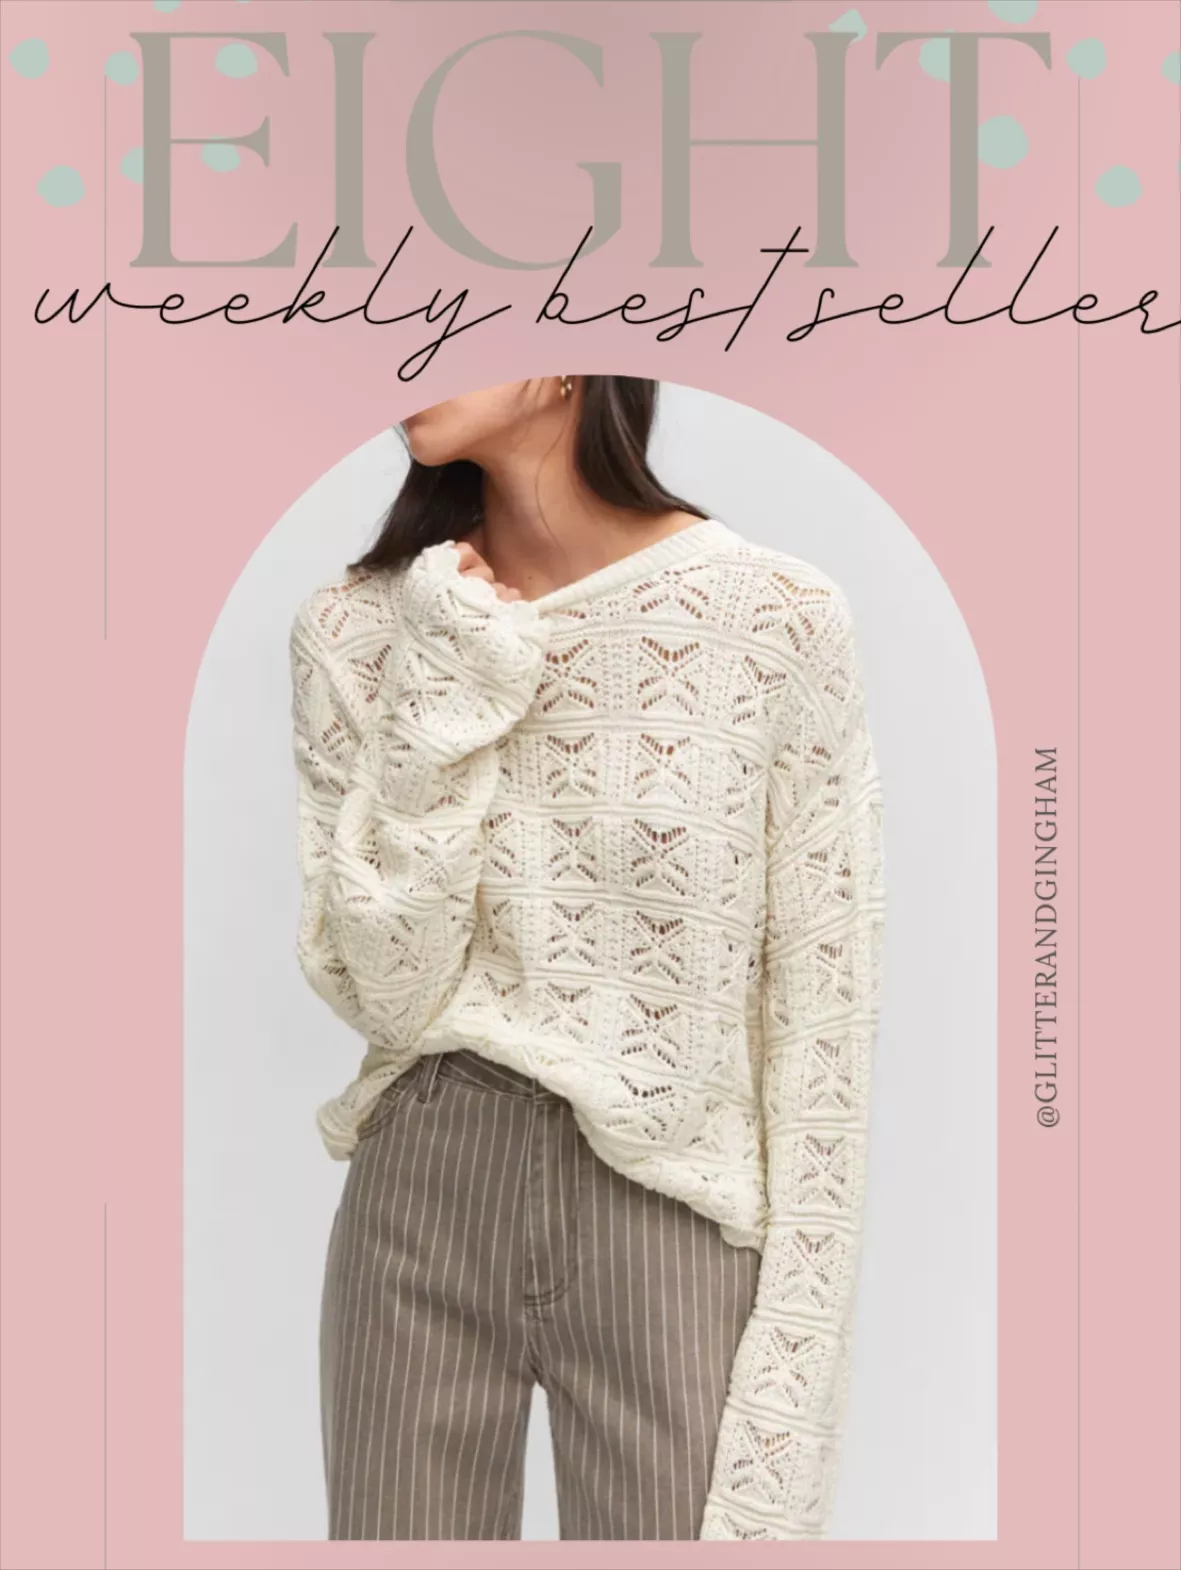 The Best Sweater Sets for Work